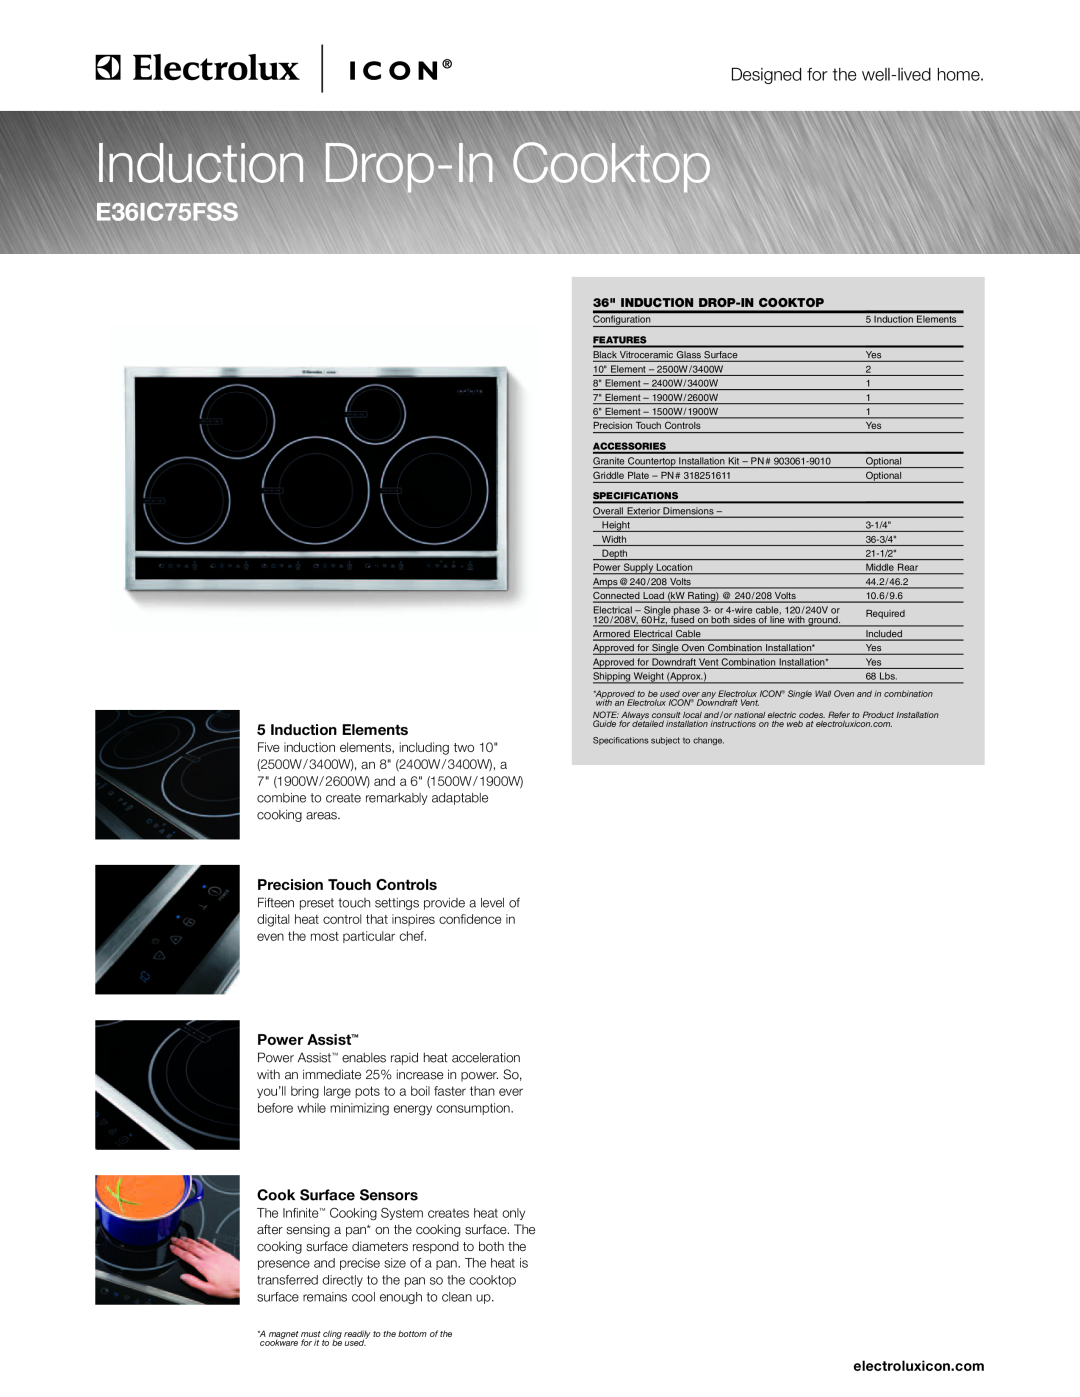 Electrolux E36EC65ESS specifications Electric Drop-In Cooktop, electroluxicon.com 